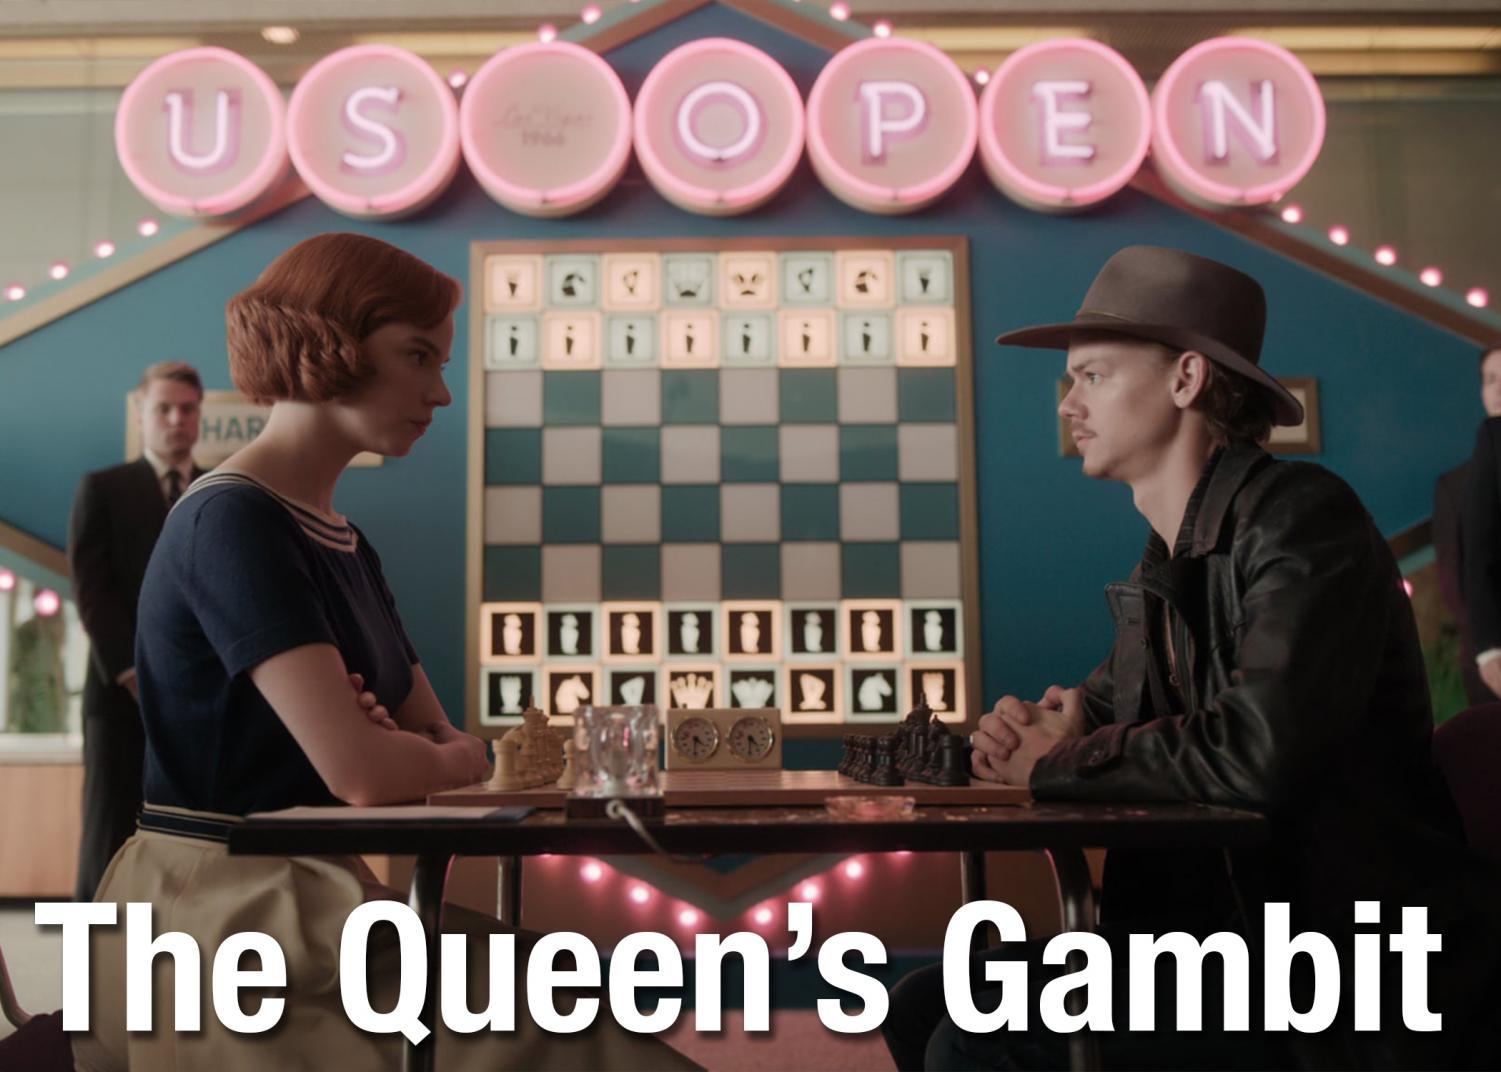 The Queen's Gambit: A TV show where a woman is celebrated for her